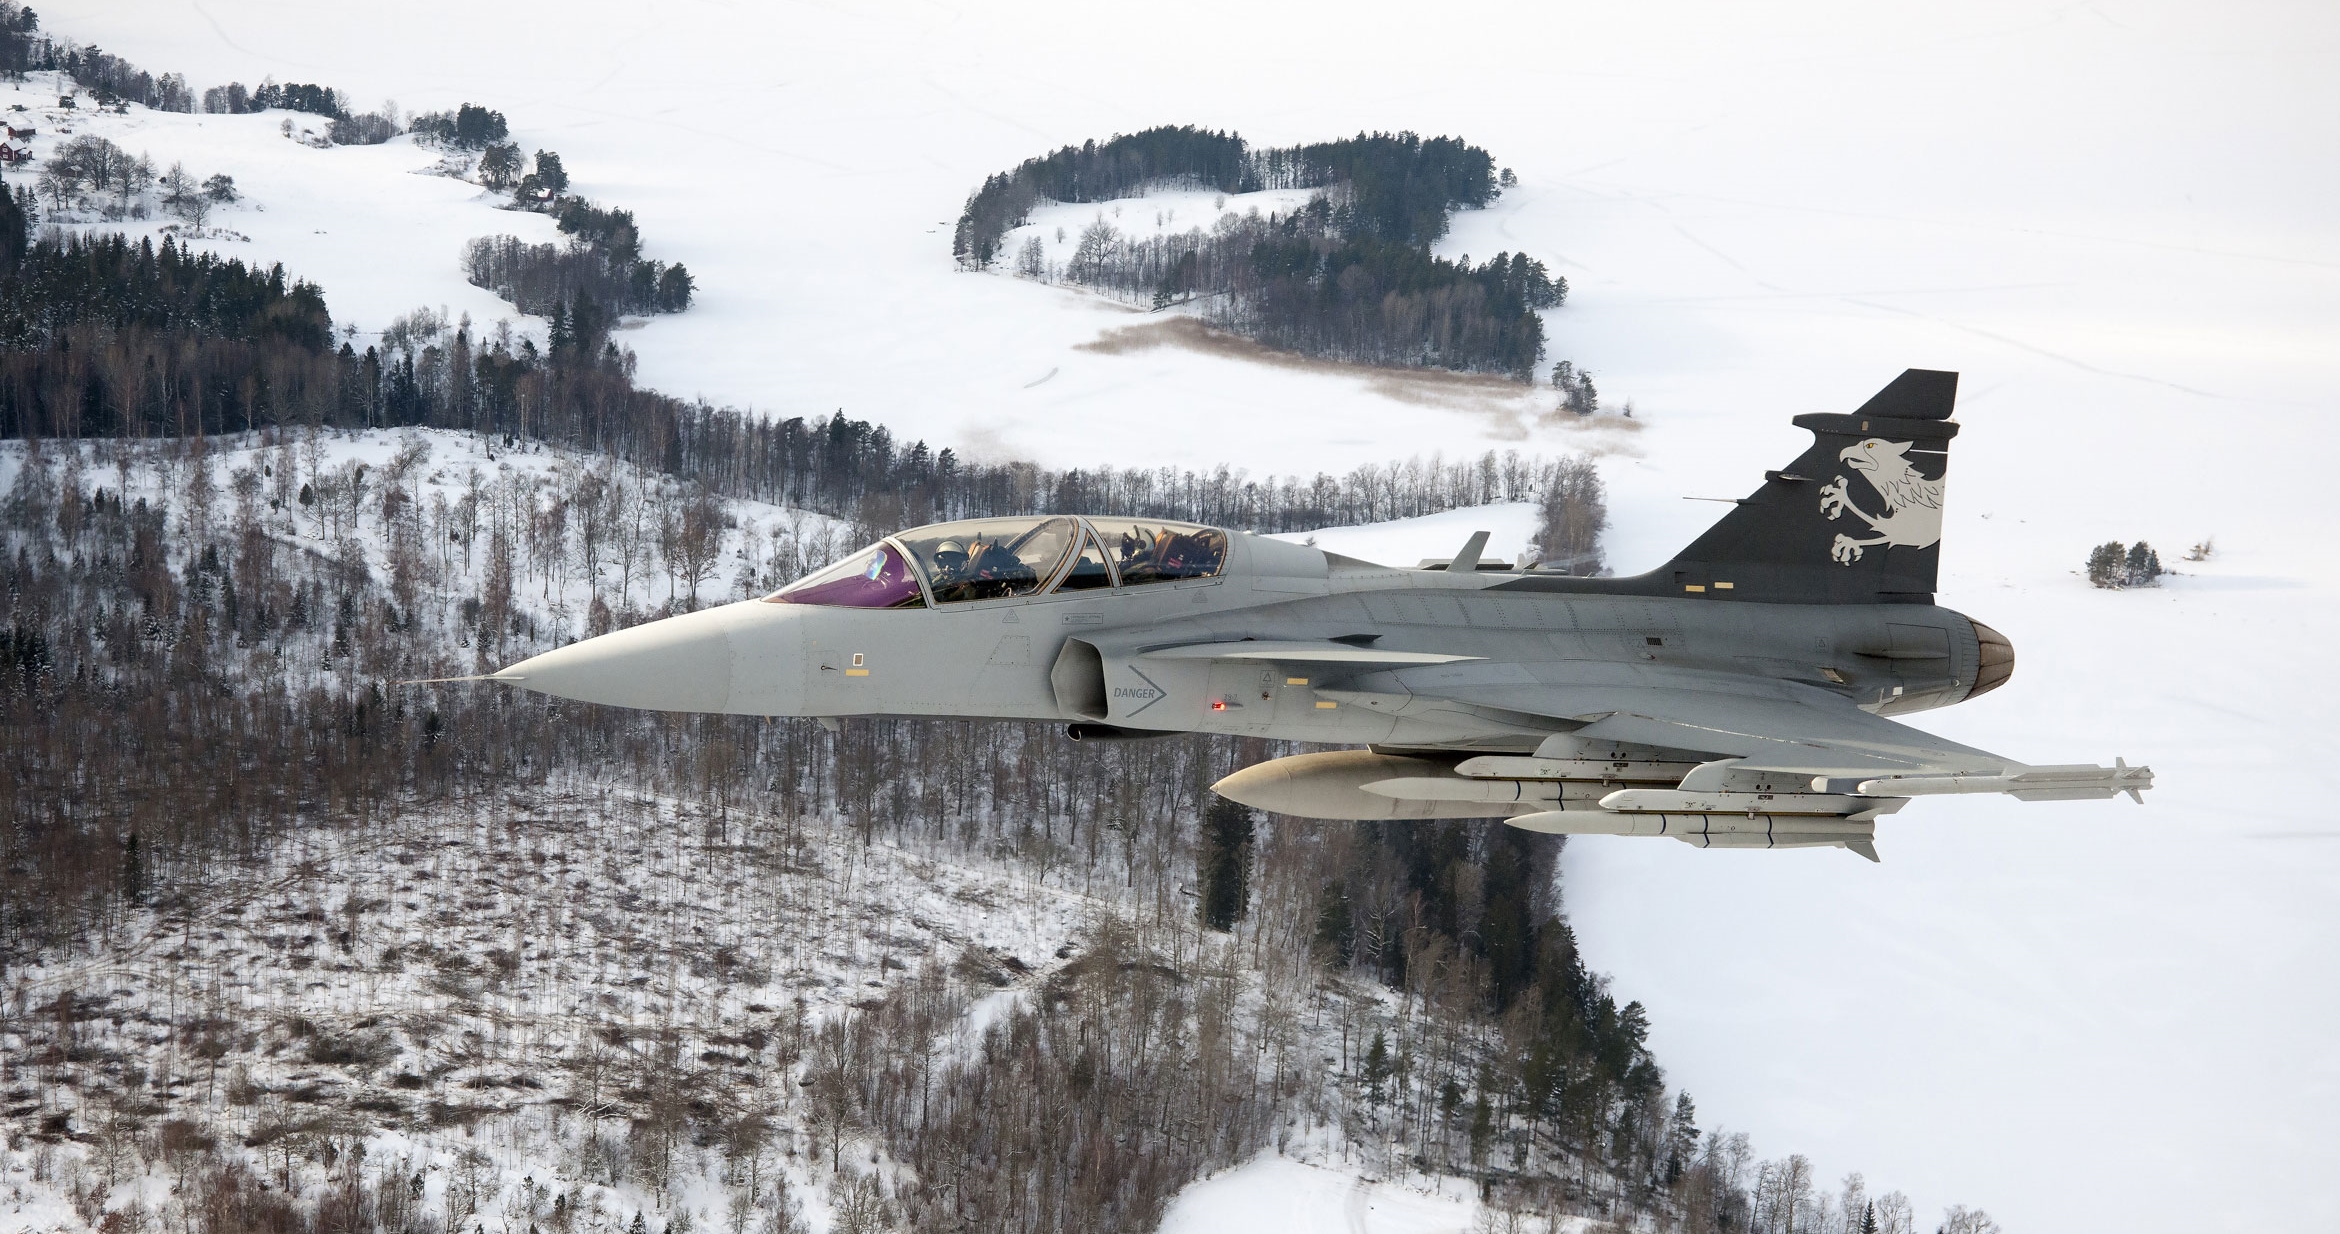 Saab manufactured Gripen fighter aircraft; Source - Saab Groups.